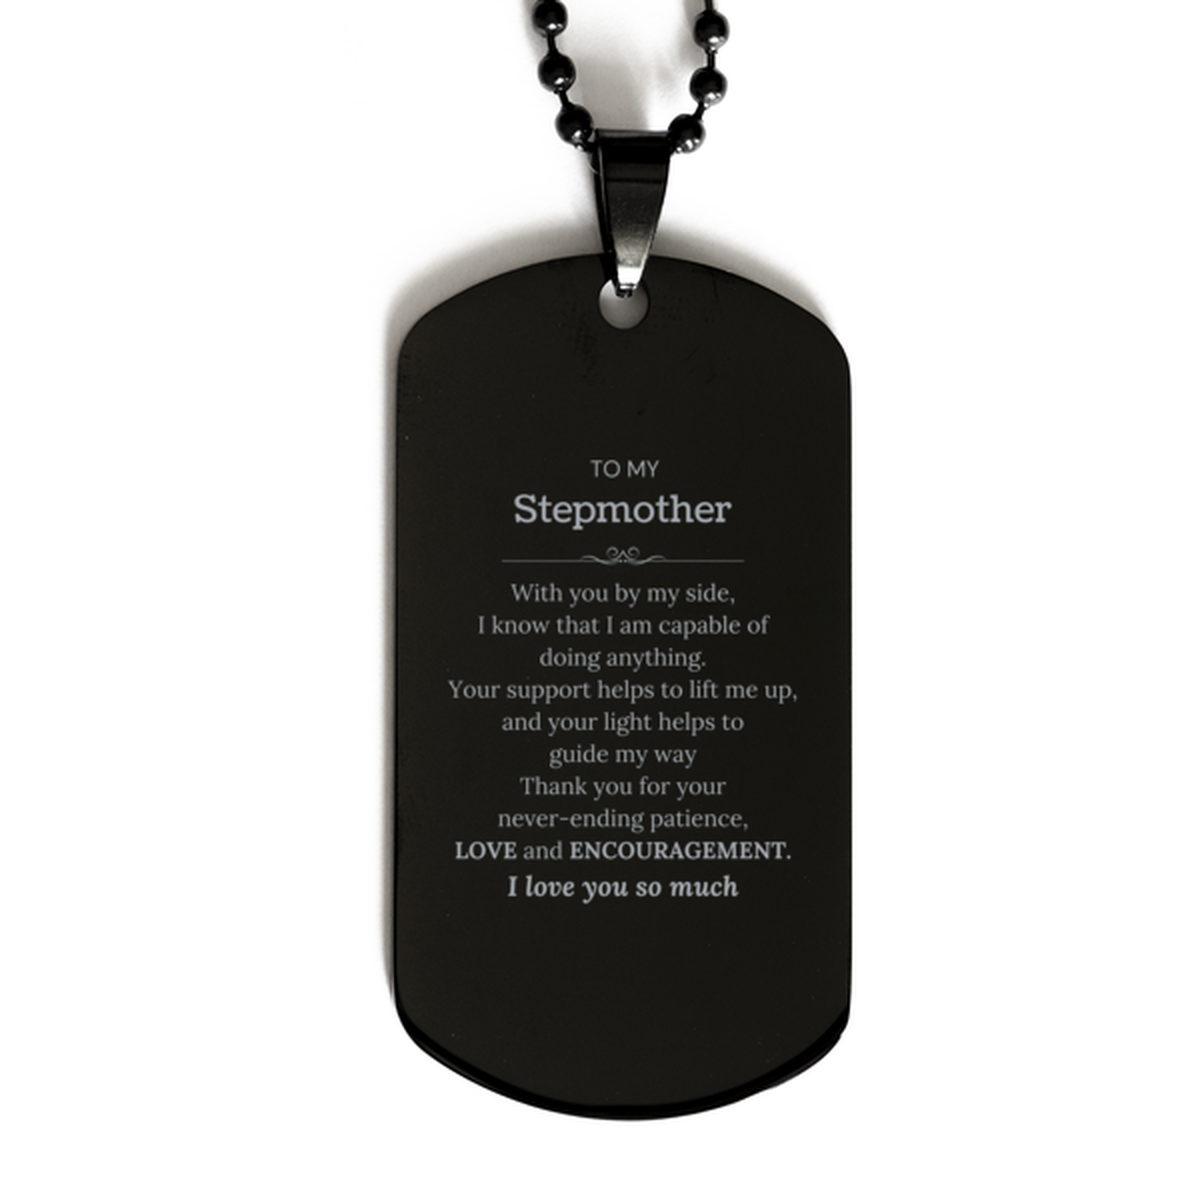 Appreciation Stepmother Black Dog Tag Gifts, To My Stepmother Birthday Christmas Wedding Keepsake Gifts for Stepmother With you by my side, I know that I am capable of doing anything. I love you so much